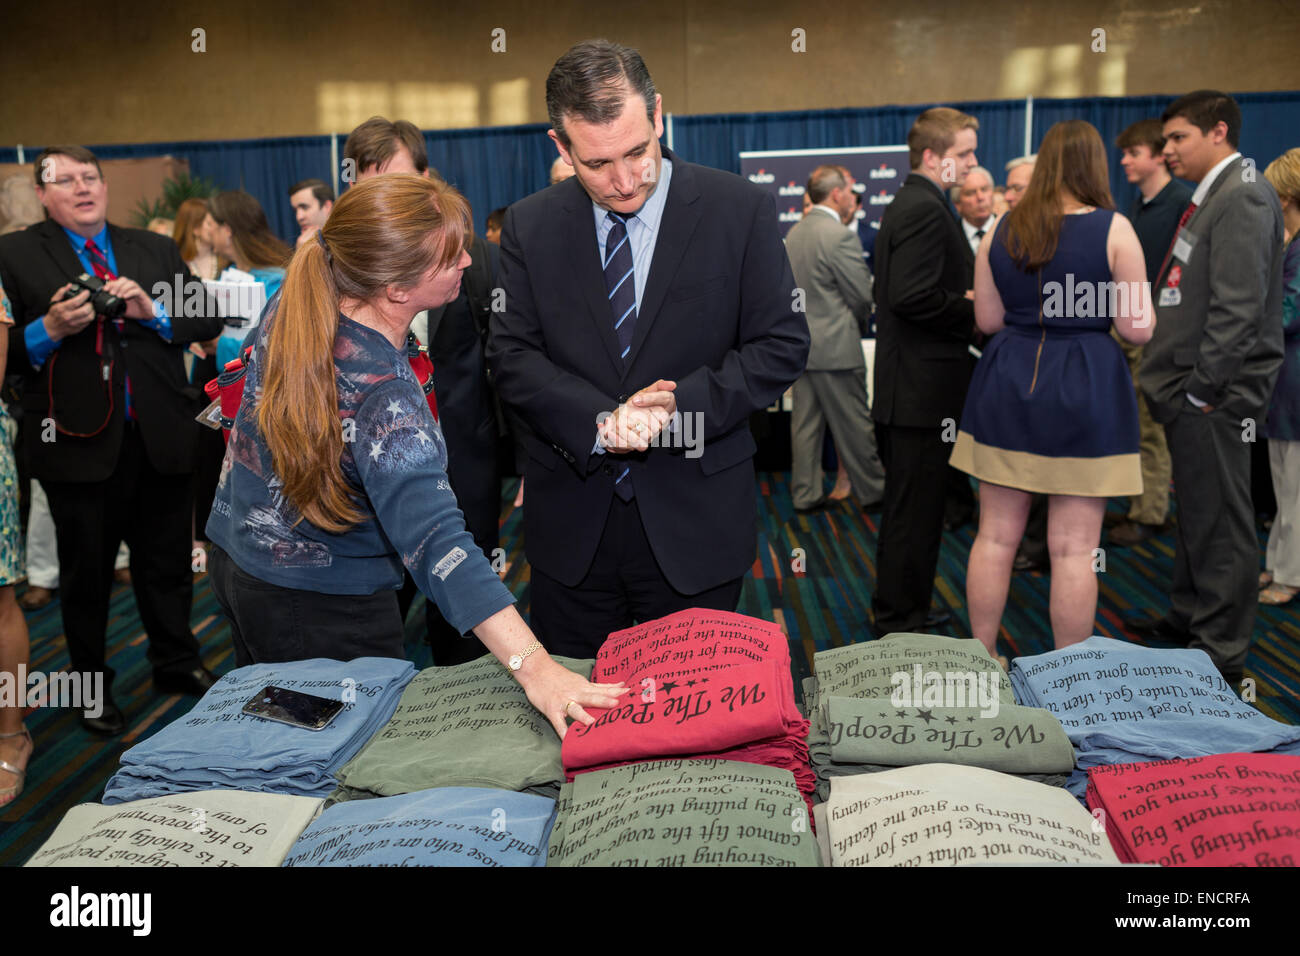 US Senator and GOP Presidential hopeful Ted Cruz views conservative slogans printed on shirts at the 48th Annual Silver Elephant Dinner on May 1, 2015 in Columbia, South Carolina. The event honored Republican National Committee Chairman Reince Priebus and was attended by several presidential candidates. Stock Photo